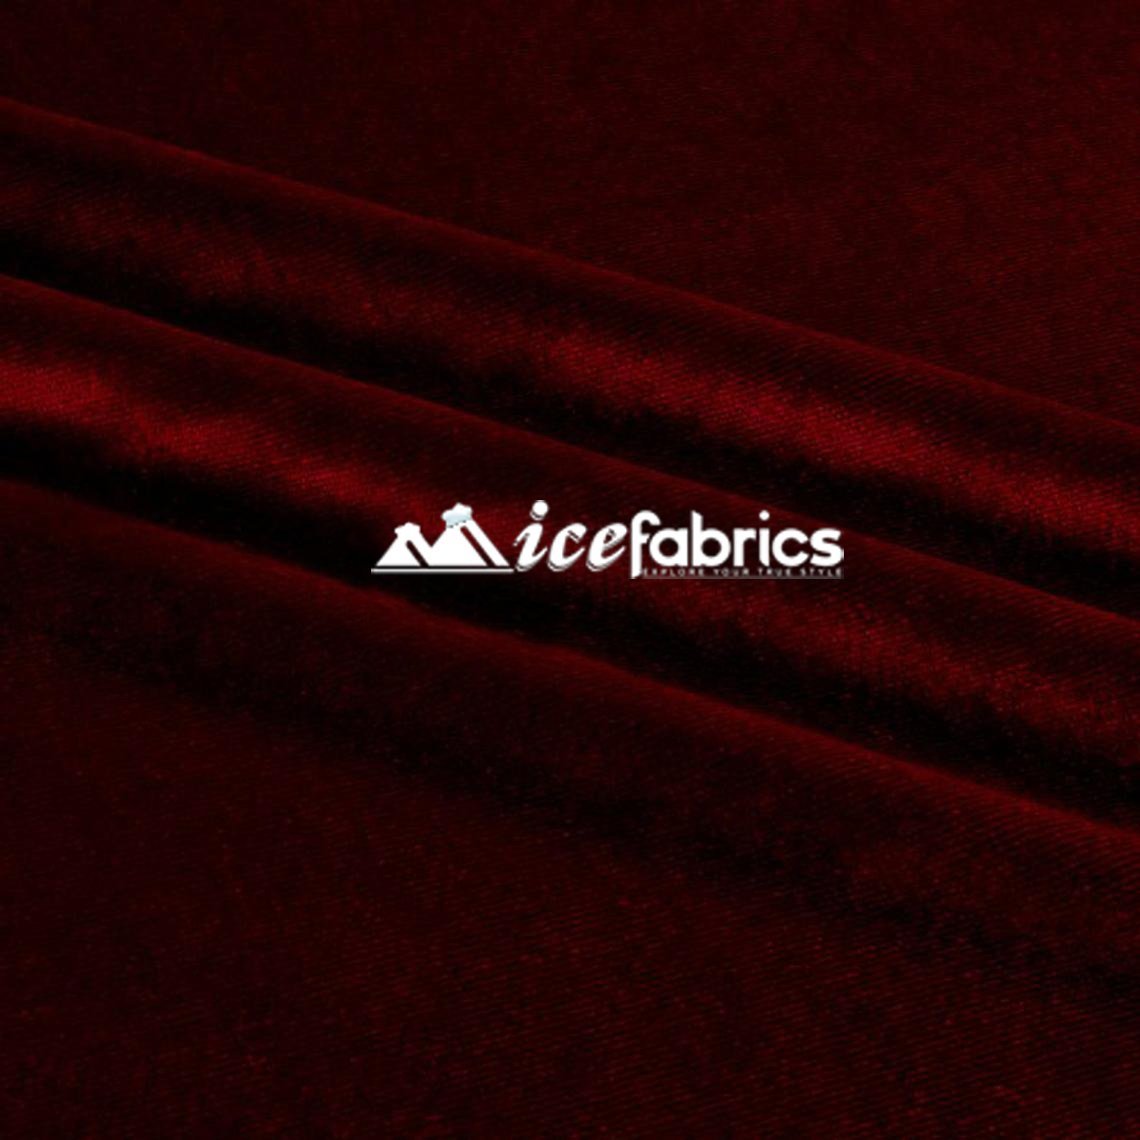 Hight Quality Stretch Velvet Fabric By The Roll (20 yards) Wholesale FabricVelvet FabricICE FABRICSICE FABRICSCranberryBy The Roll (60" Wide)Hight Quality Stretch Velvet Fabric By The Roll (20 yards) Wholesale Fabric ICE FABRICS Cranberry